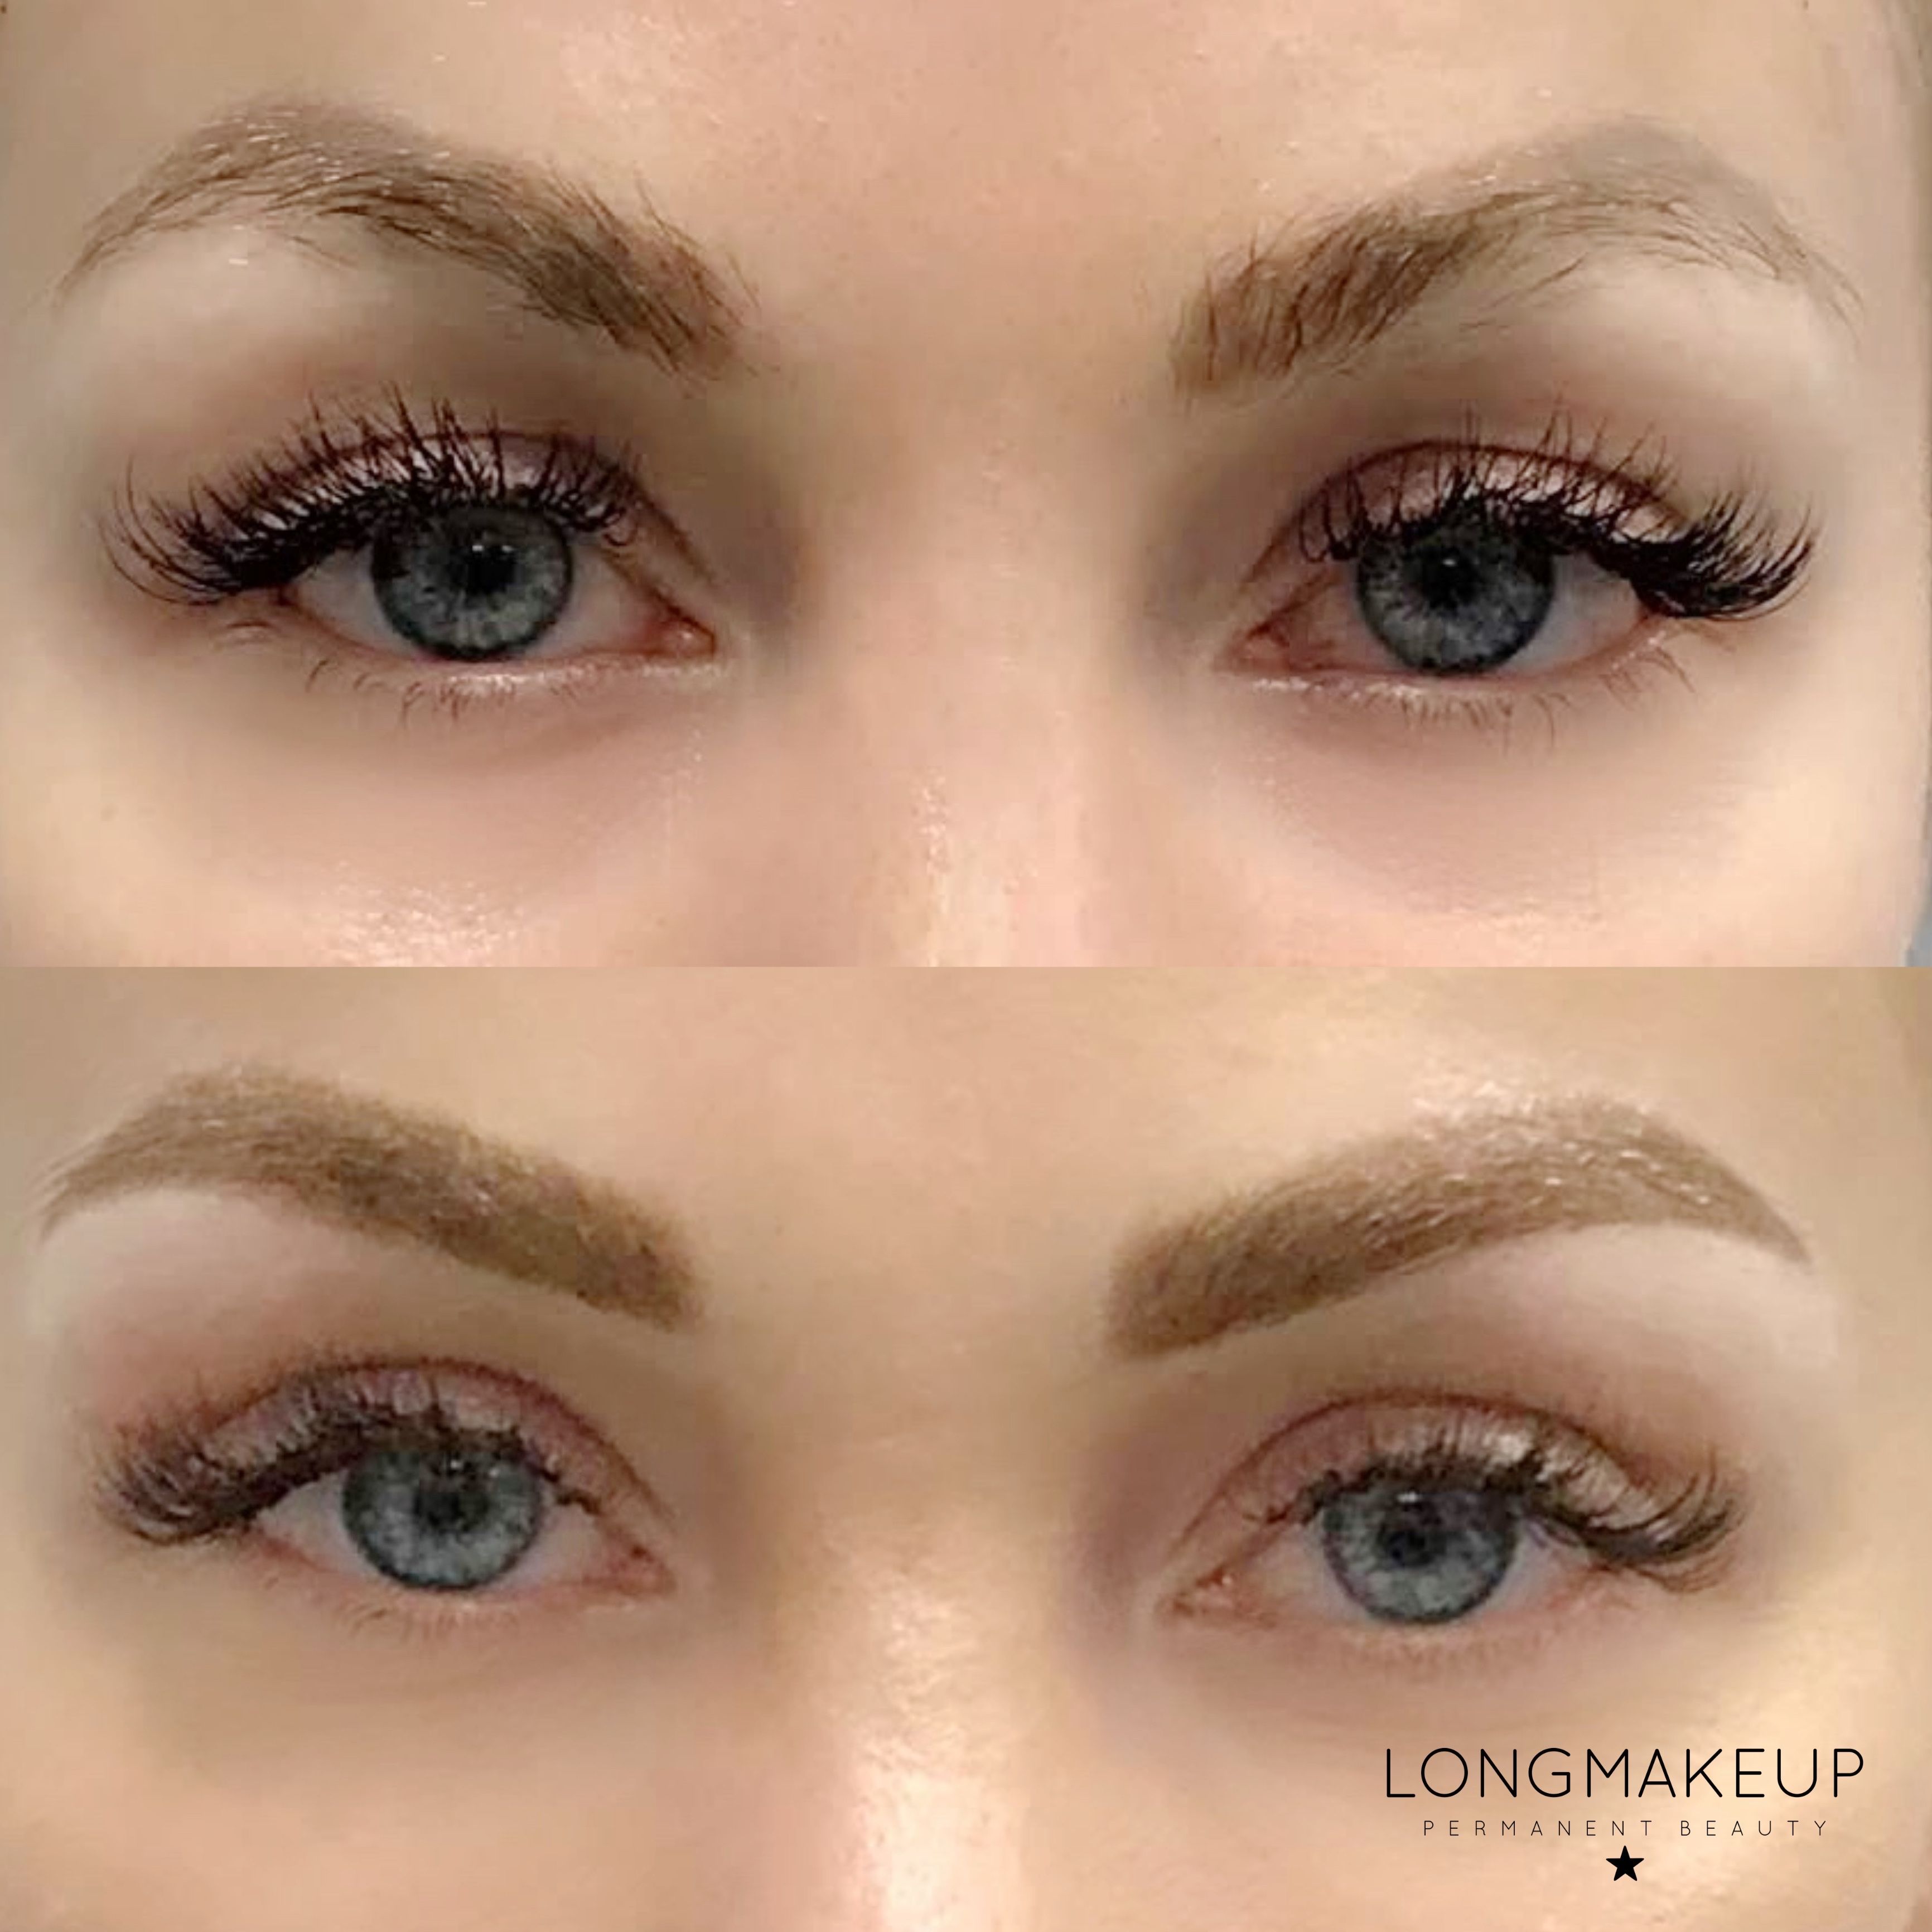 HOW TO CORRECT PERMANENT MAKEUP - Arch Angels NYC